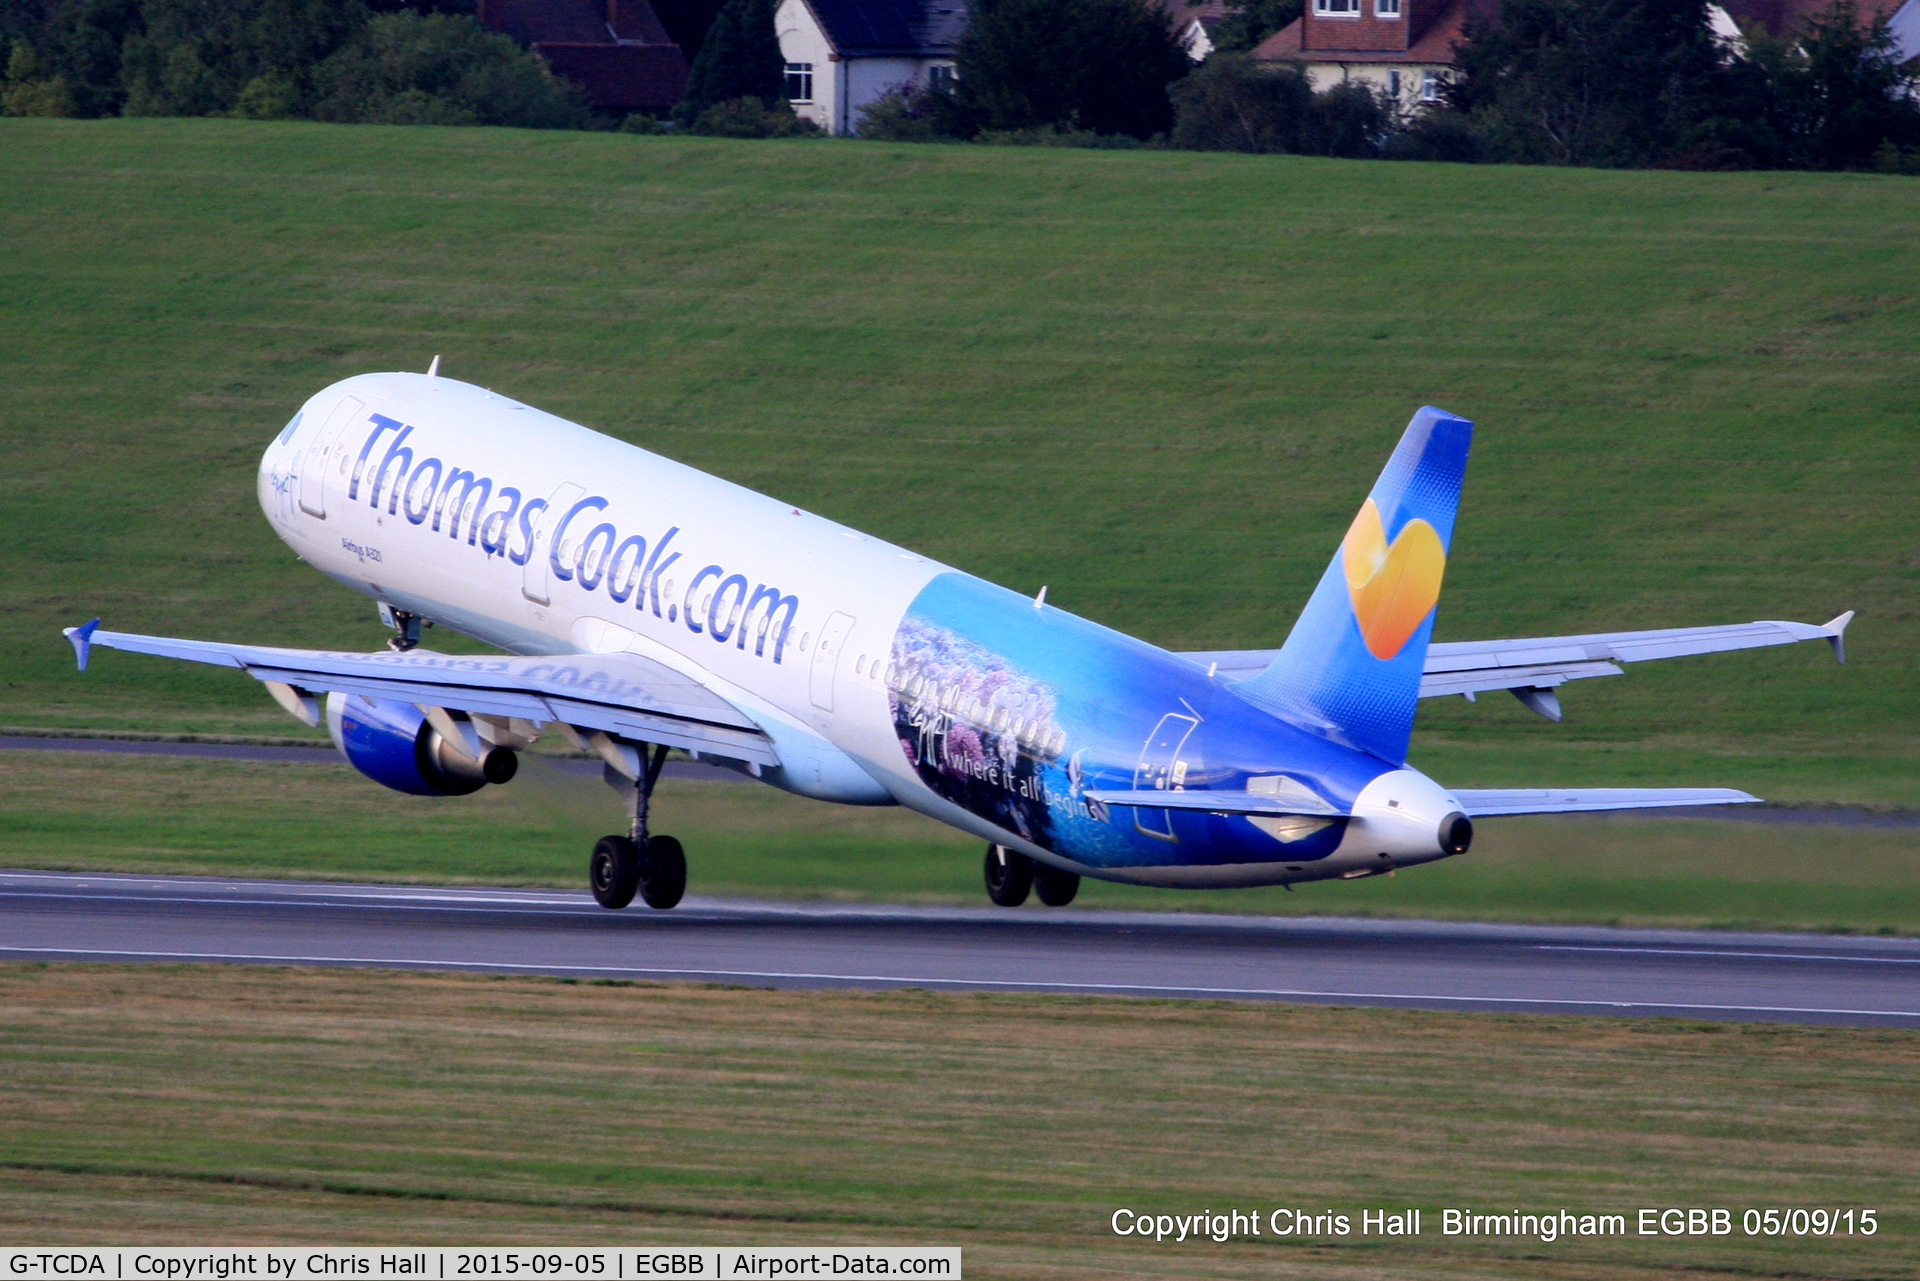 G-TCDA, 2003 Airbus A321-211 C/N 2060, Thomas Cook Airlines